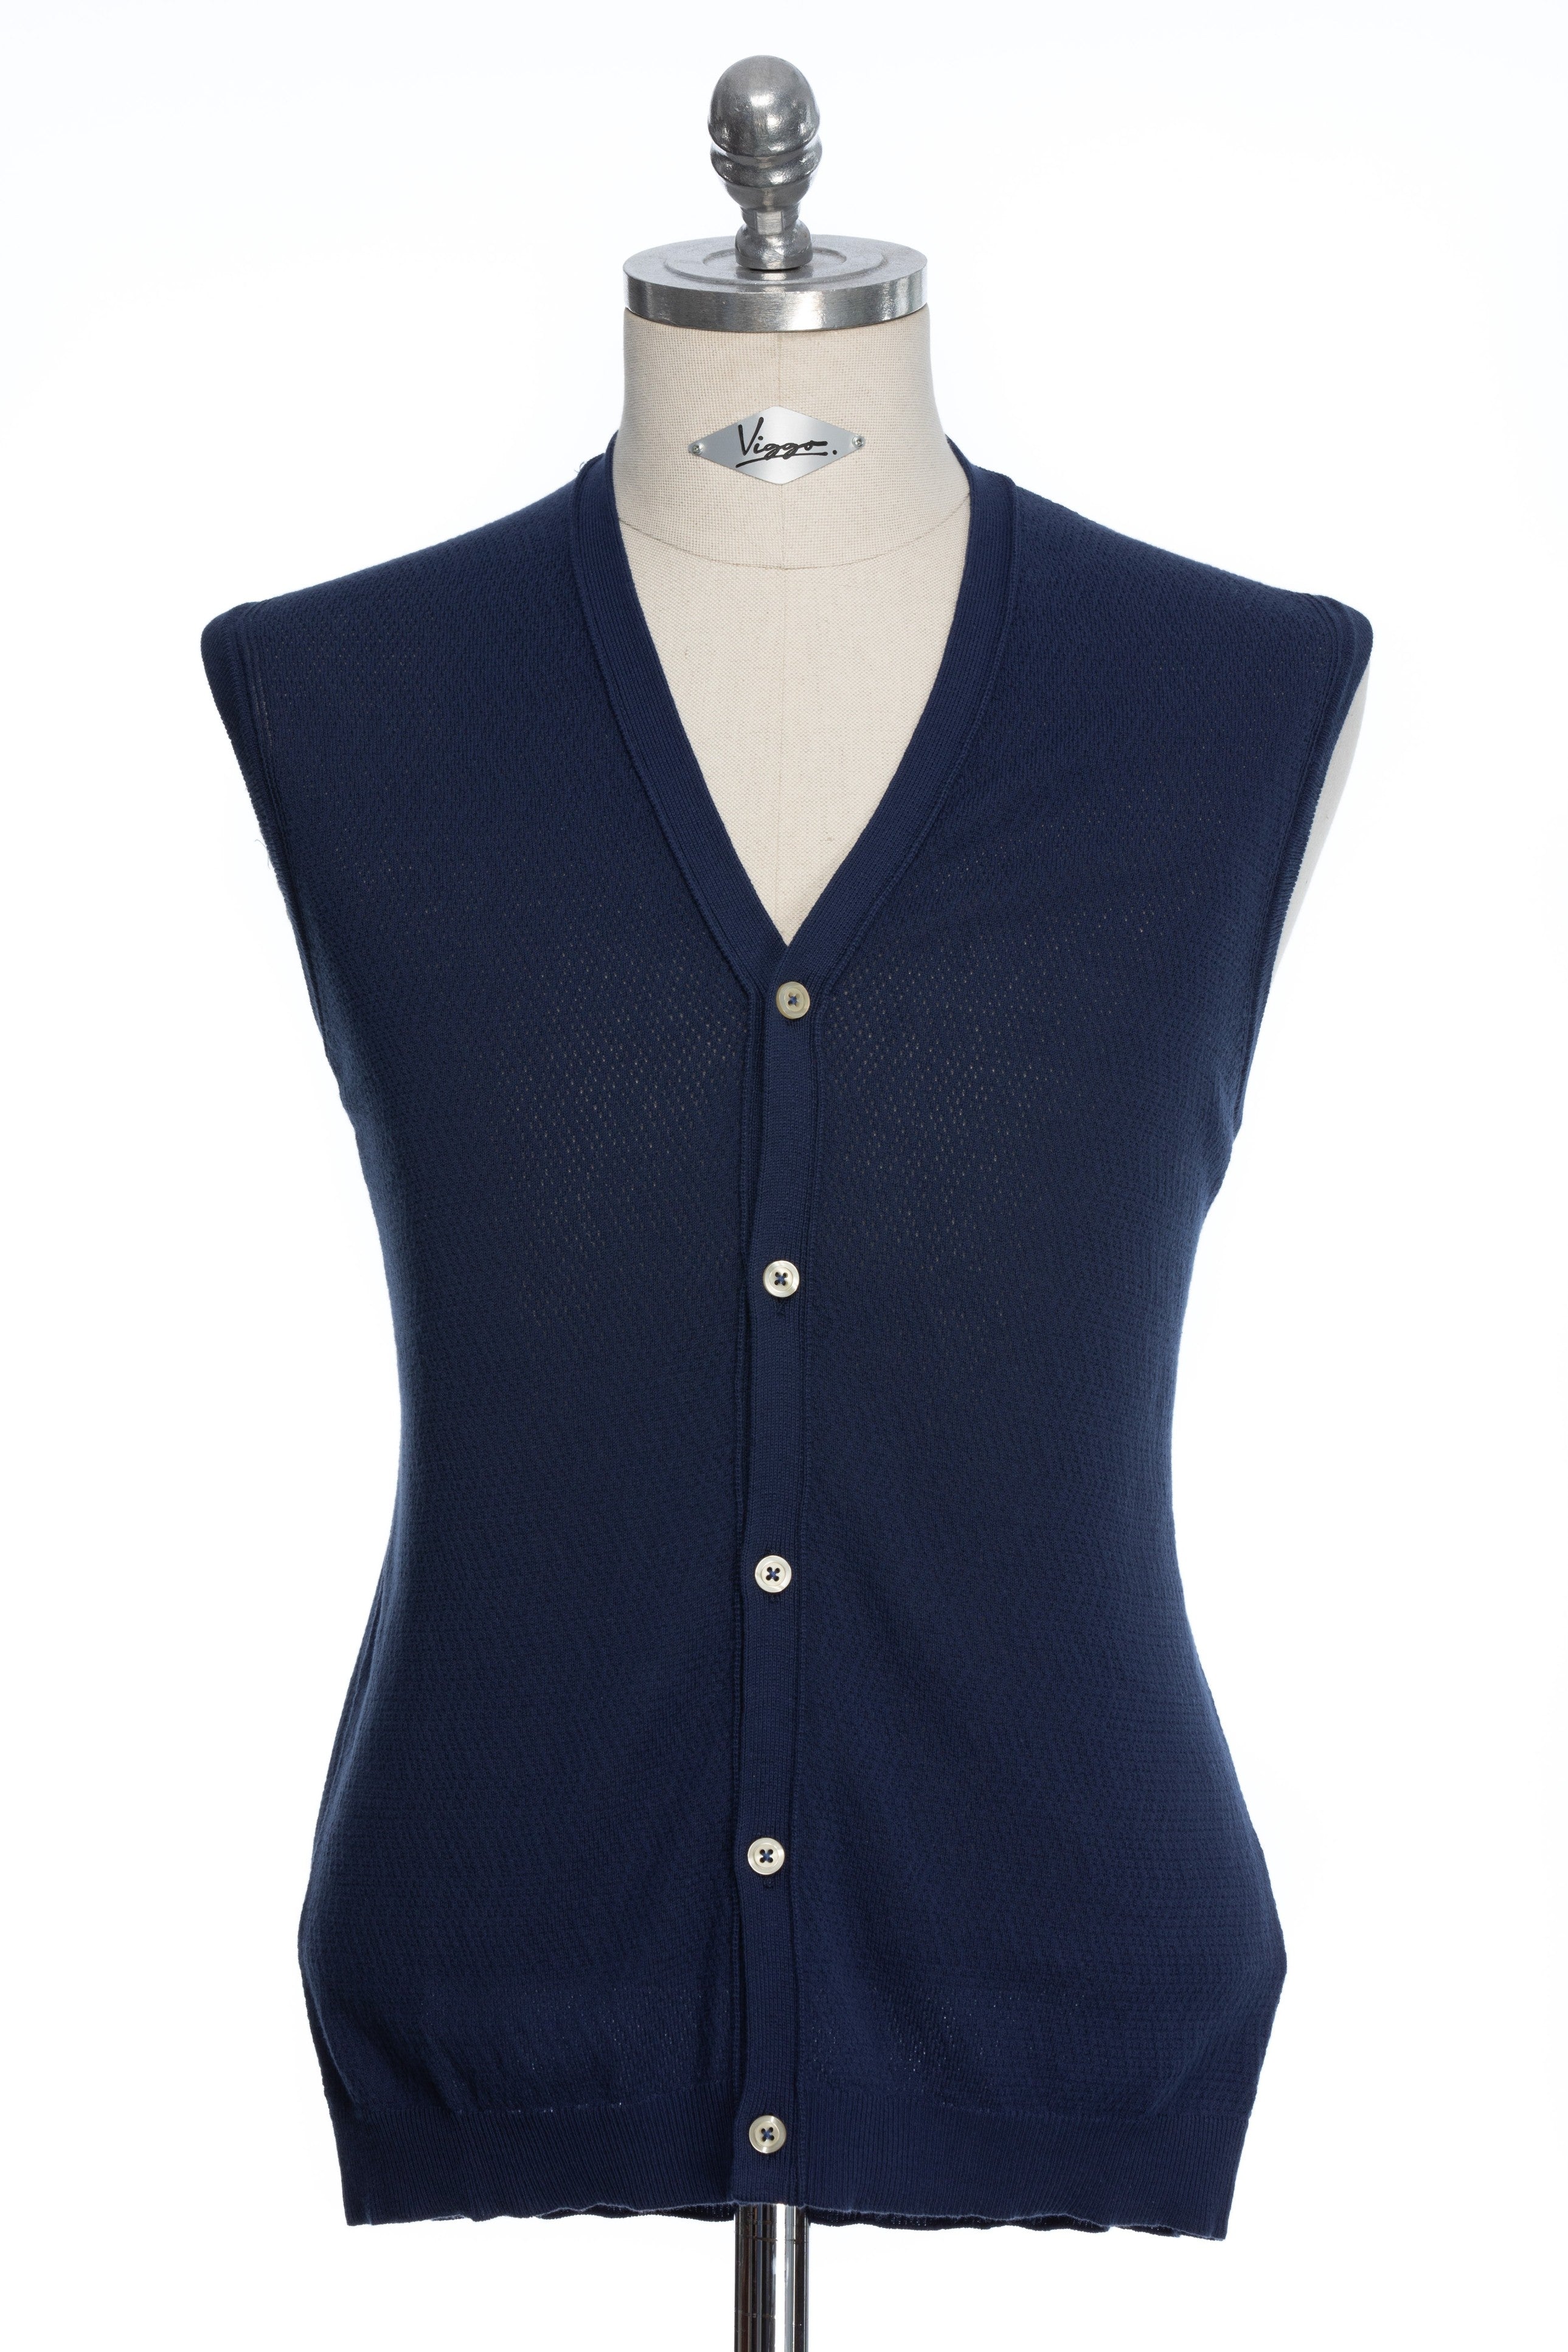 Navy Blue Textured Casual Vest With Buttons